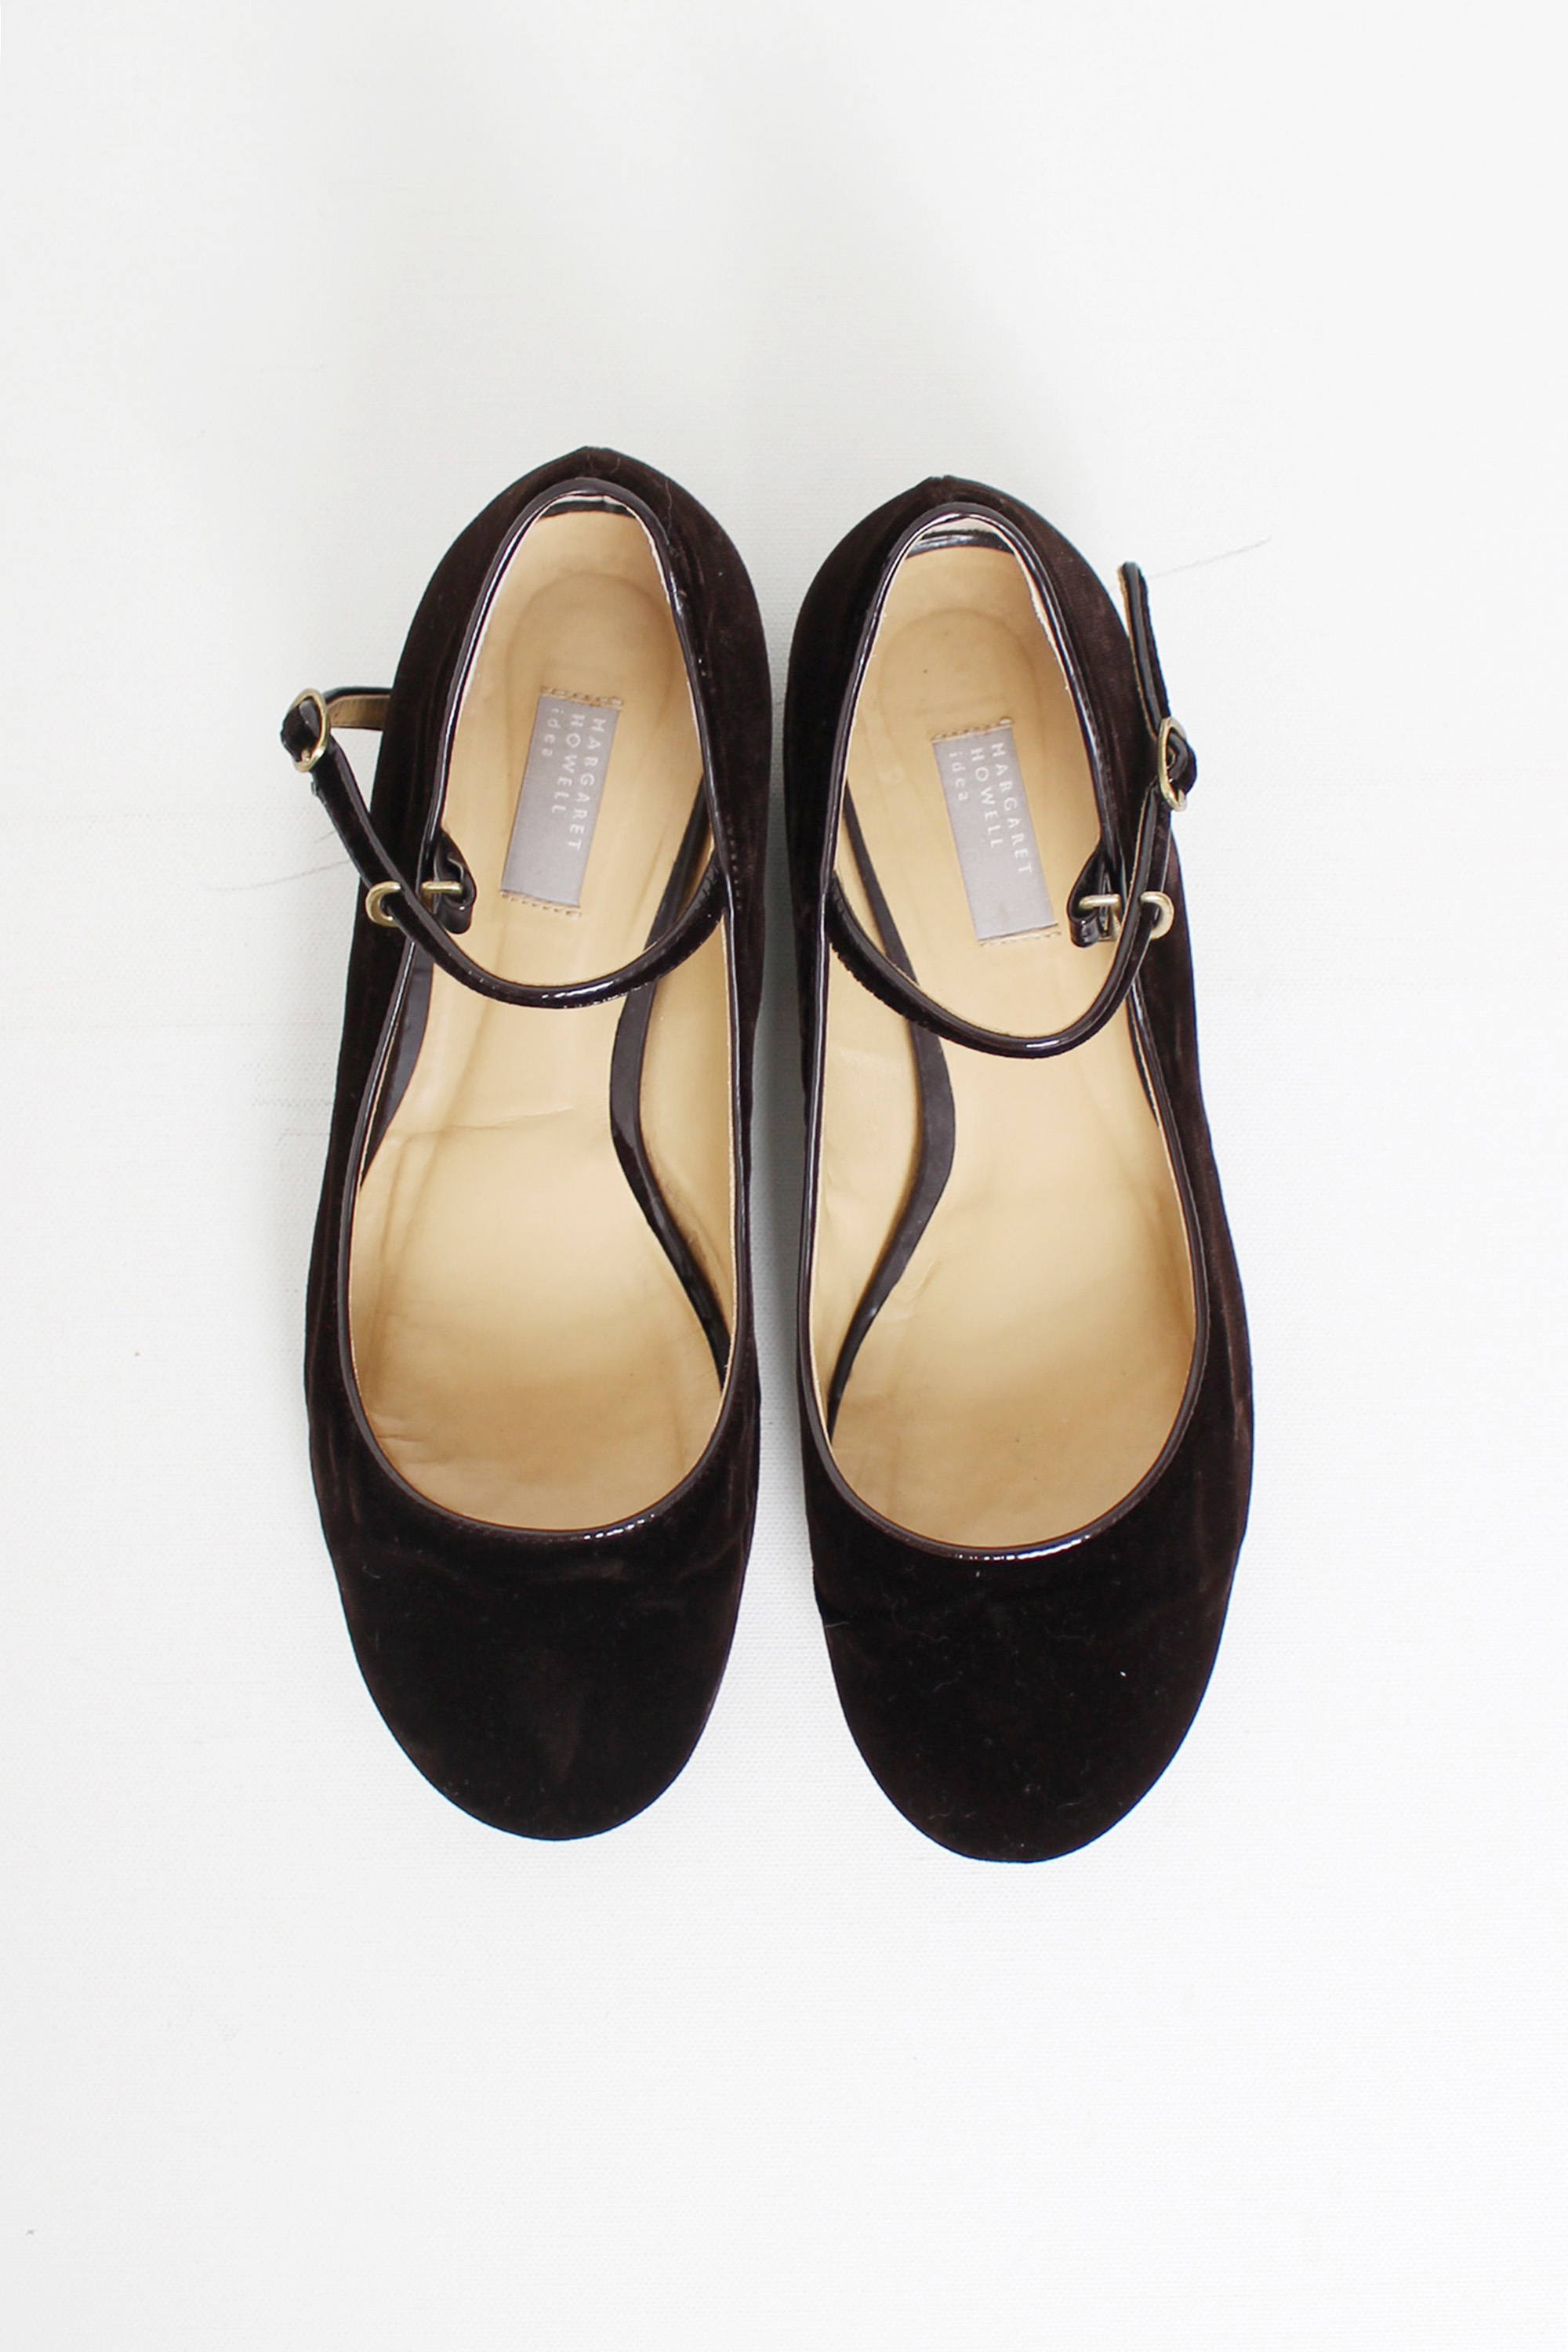 MARGARET HOWELL  mary jane shoes